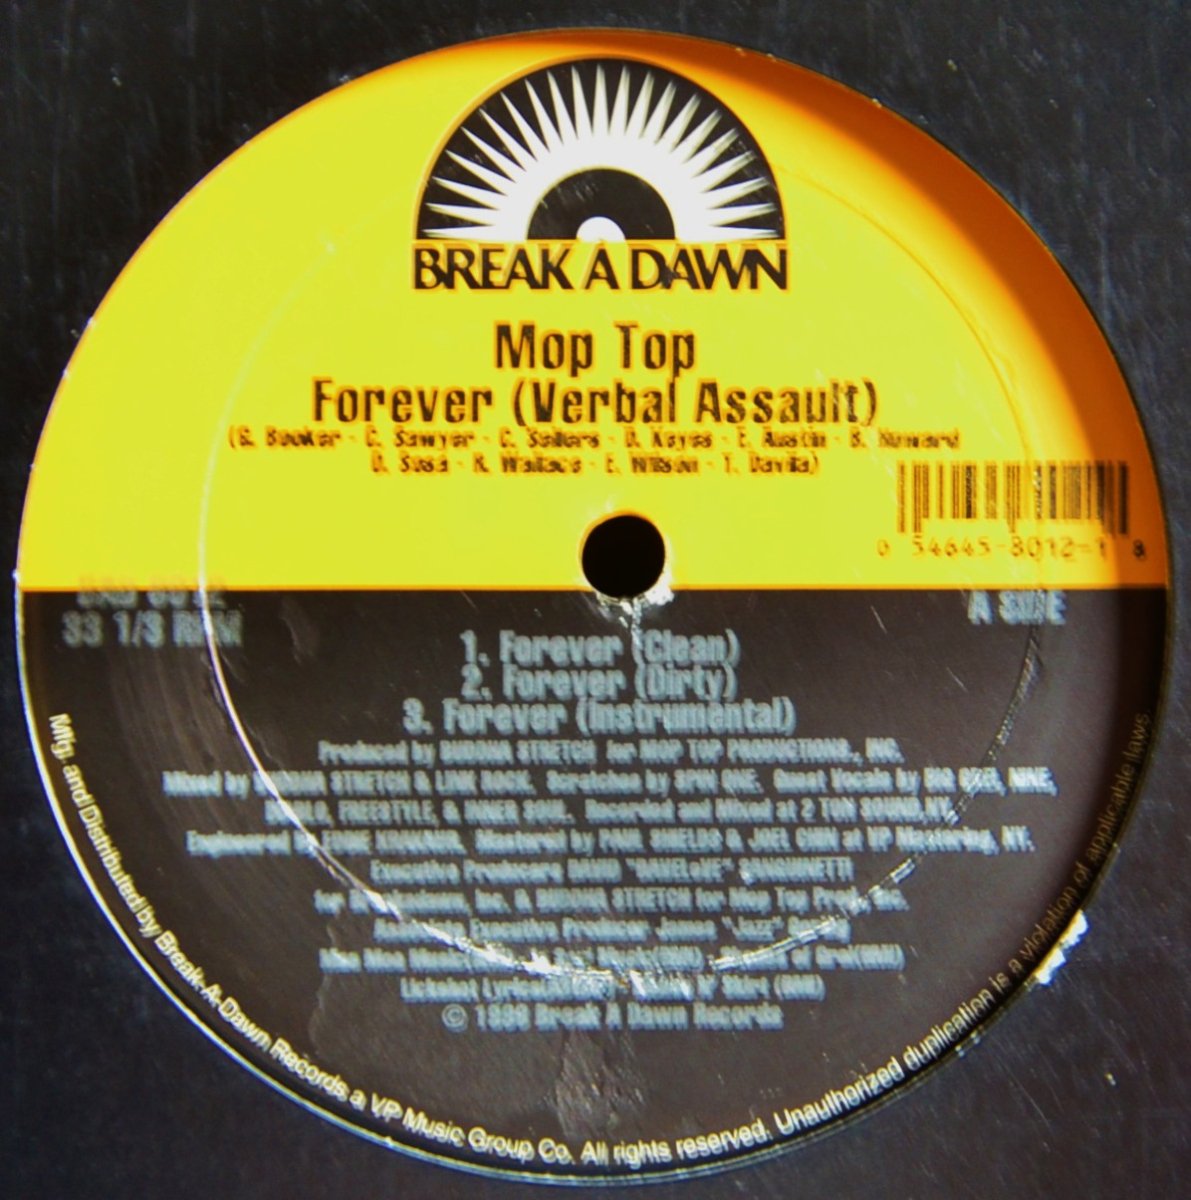 MOP TOP / FOREVER (VERBAL ASSAULT) / I'M ALRIGHT (12